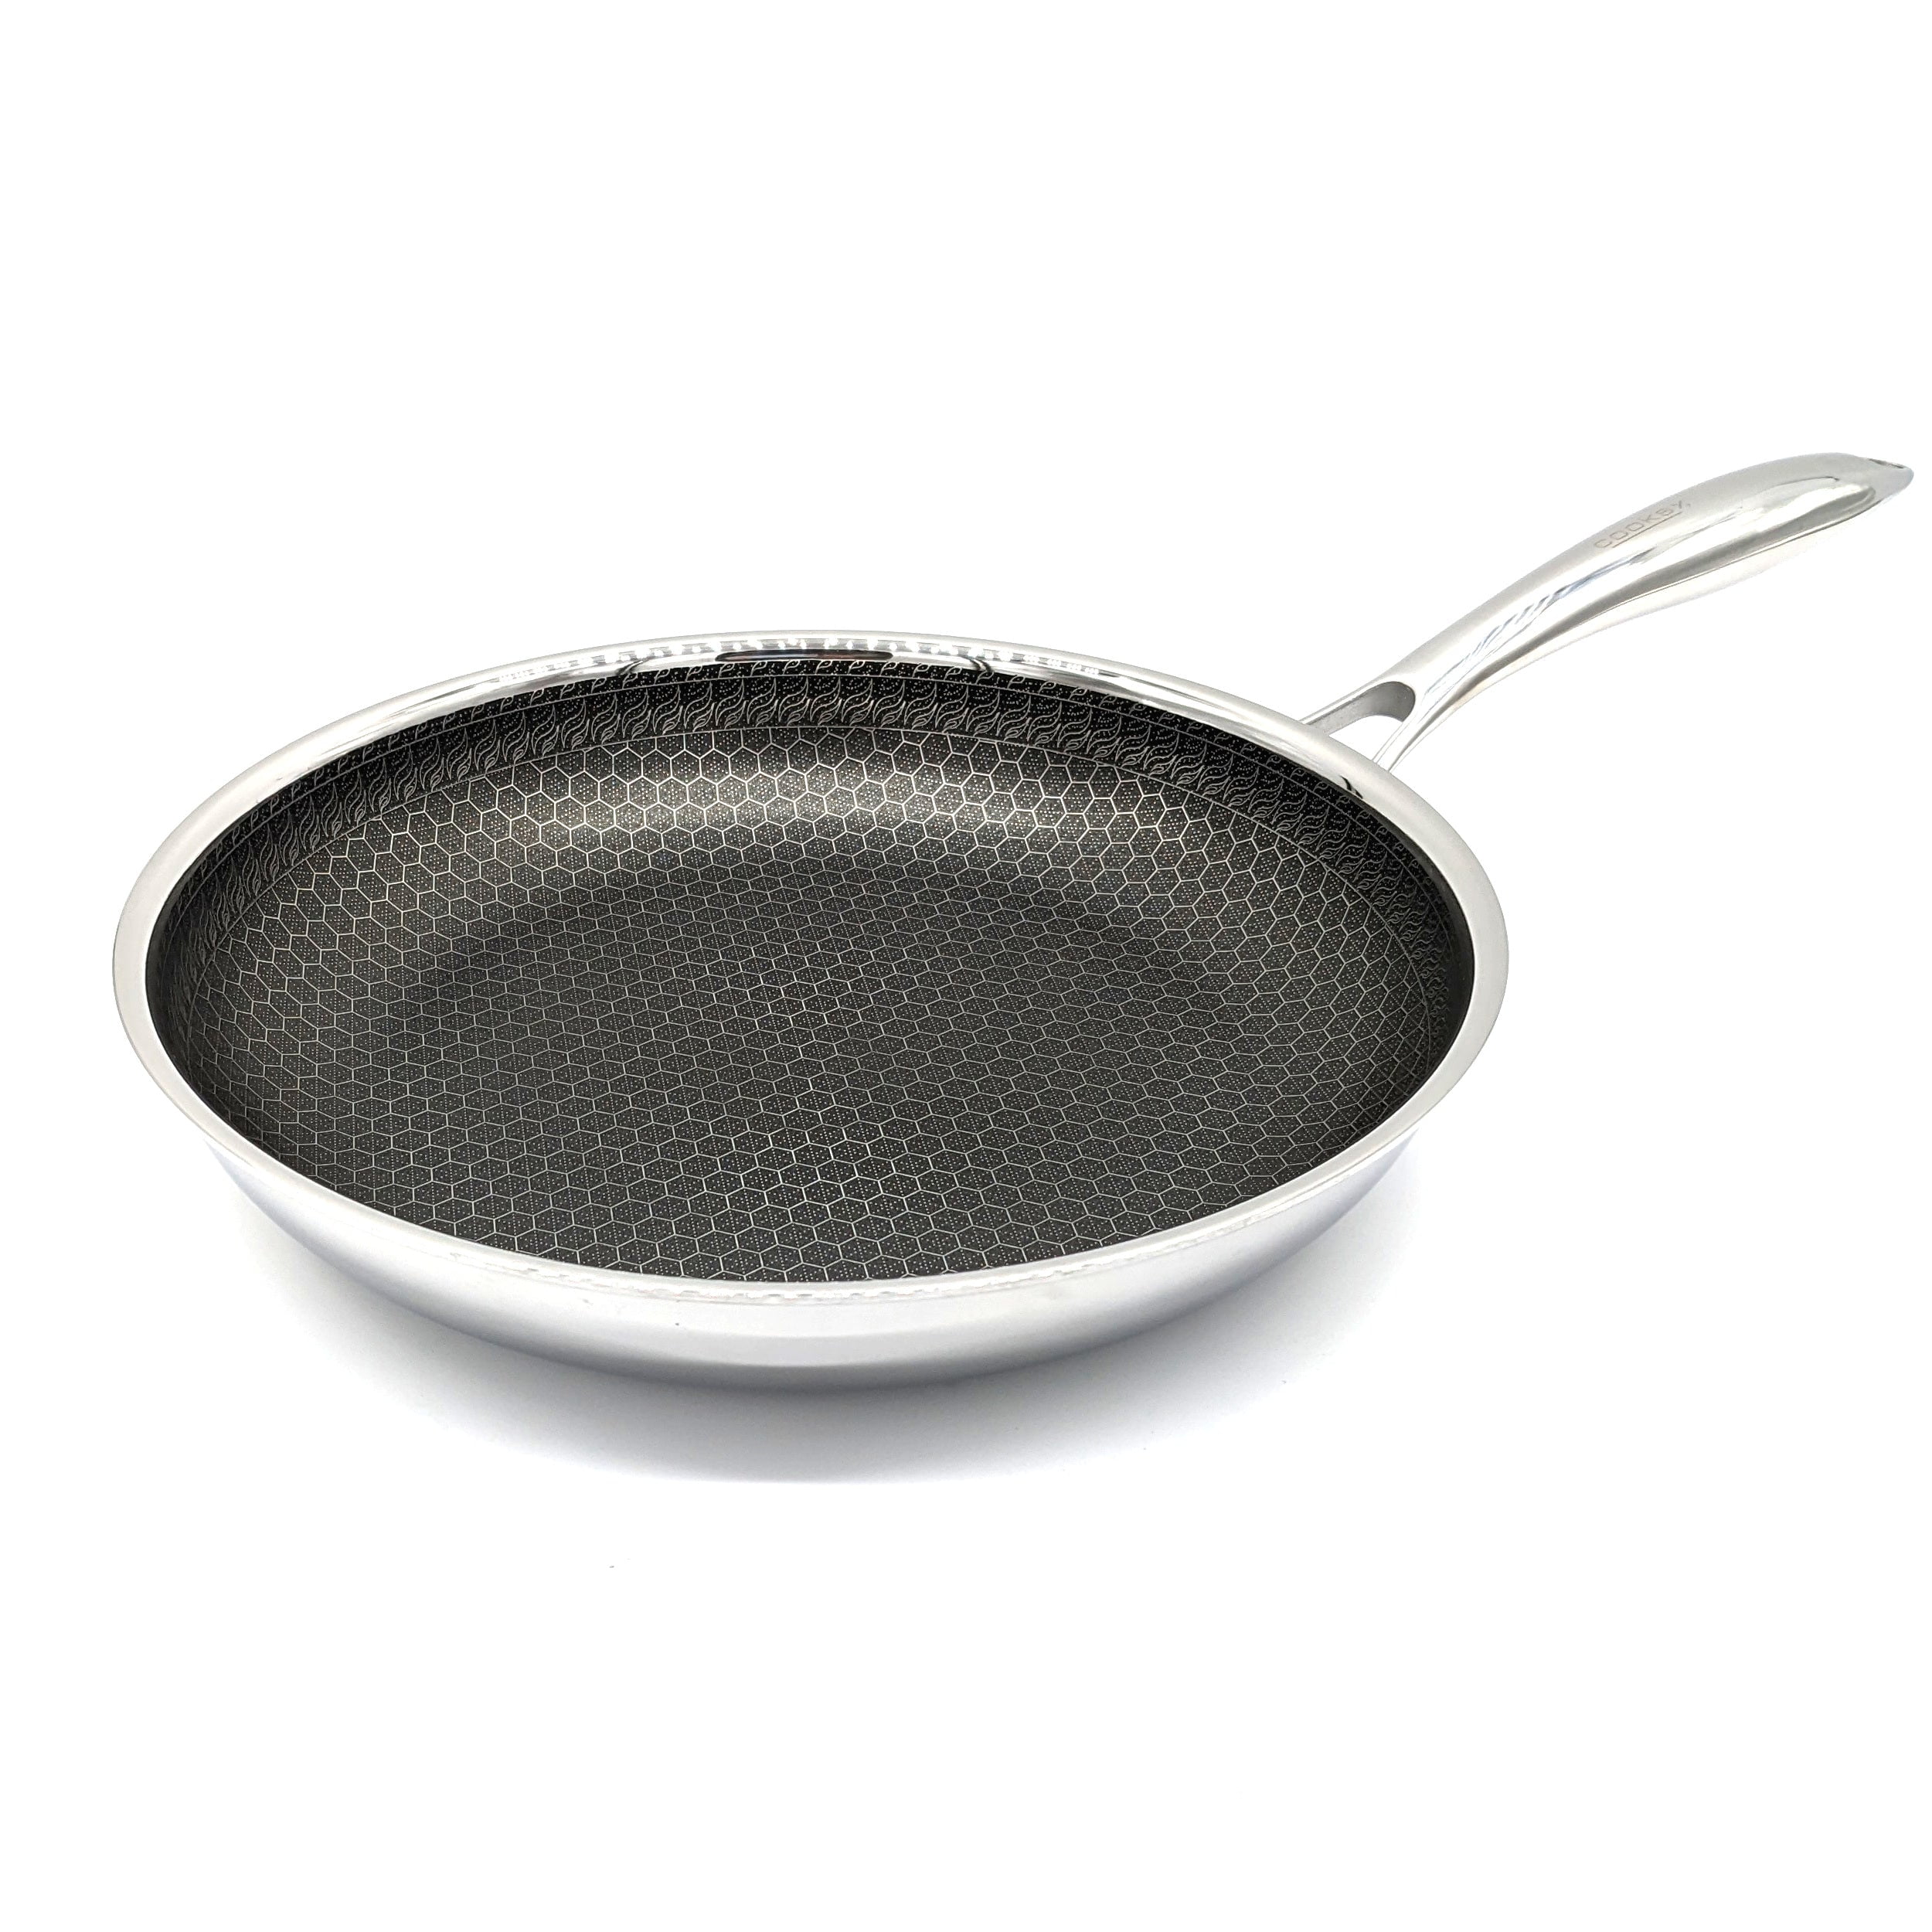 Cooksy 11 Inch Hexagon Surface Hybrid Stainless Steel Frying Pan